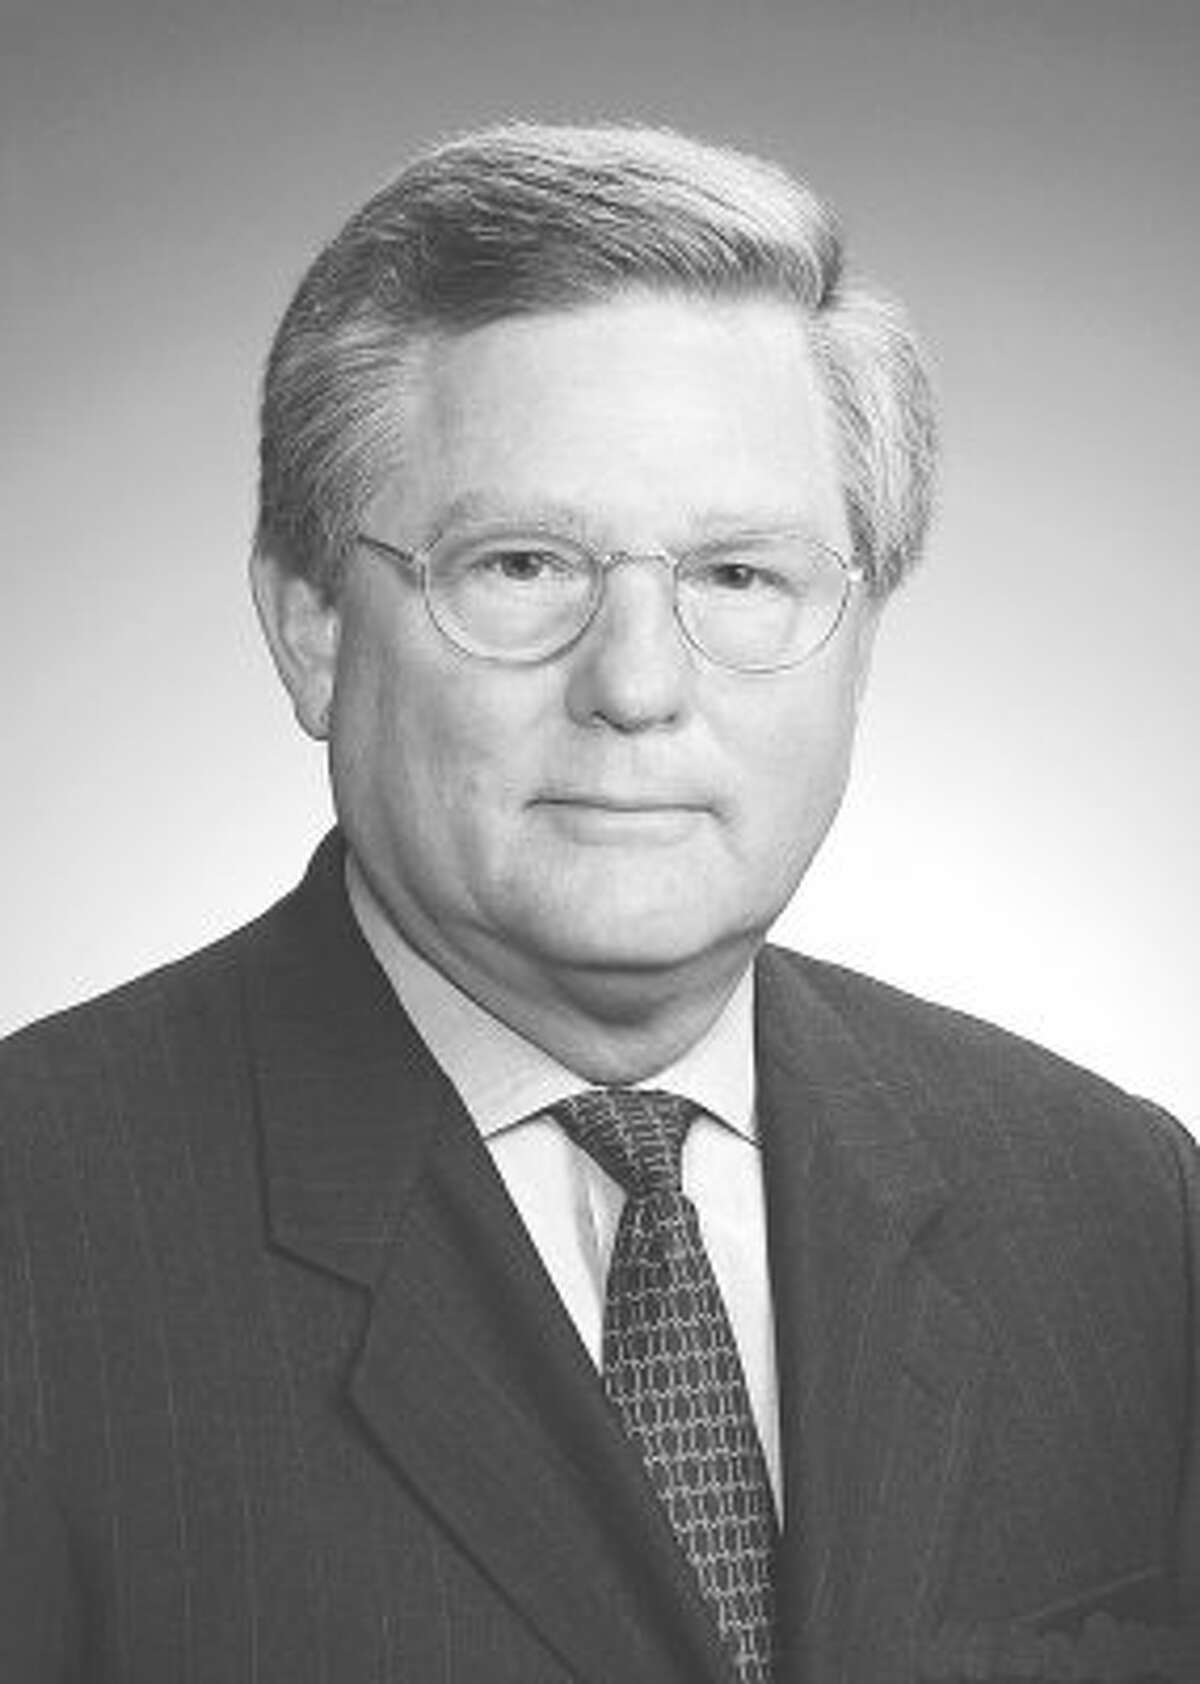 James T. Edmonds, former Chairman of the Port Commission of the Port of Houston Authority, passed away on May 11. Edmonds dedicated 16 years of service to the Port Commission, including serving 12 years as chairman.